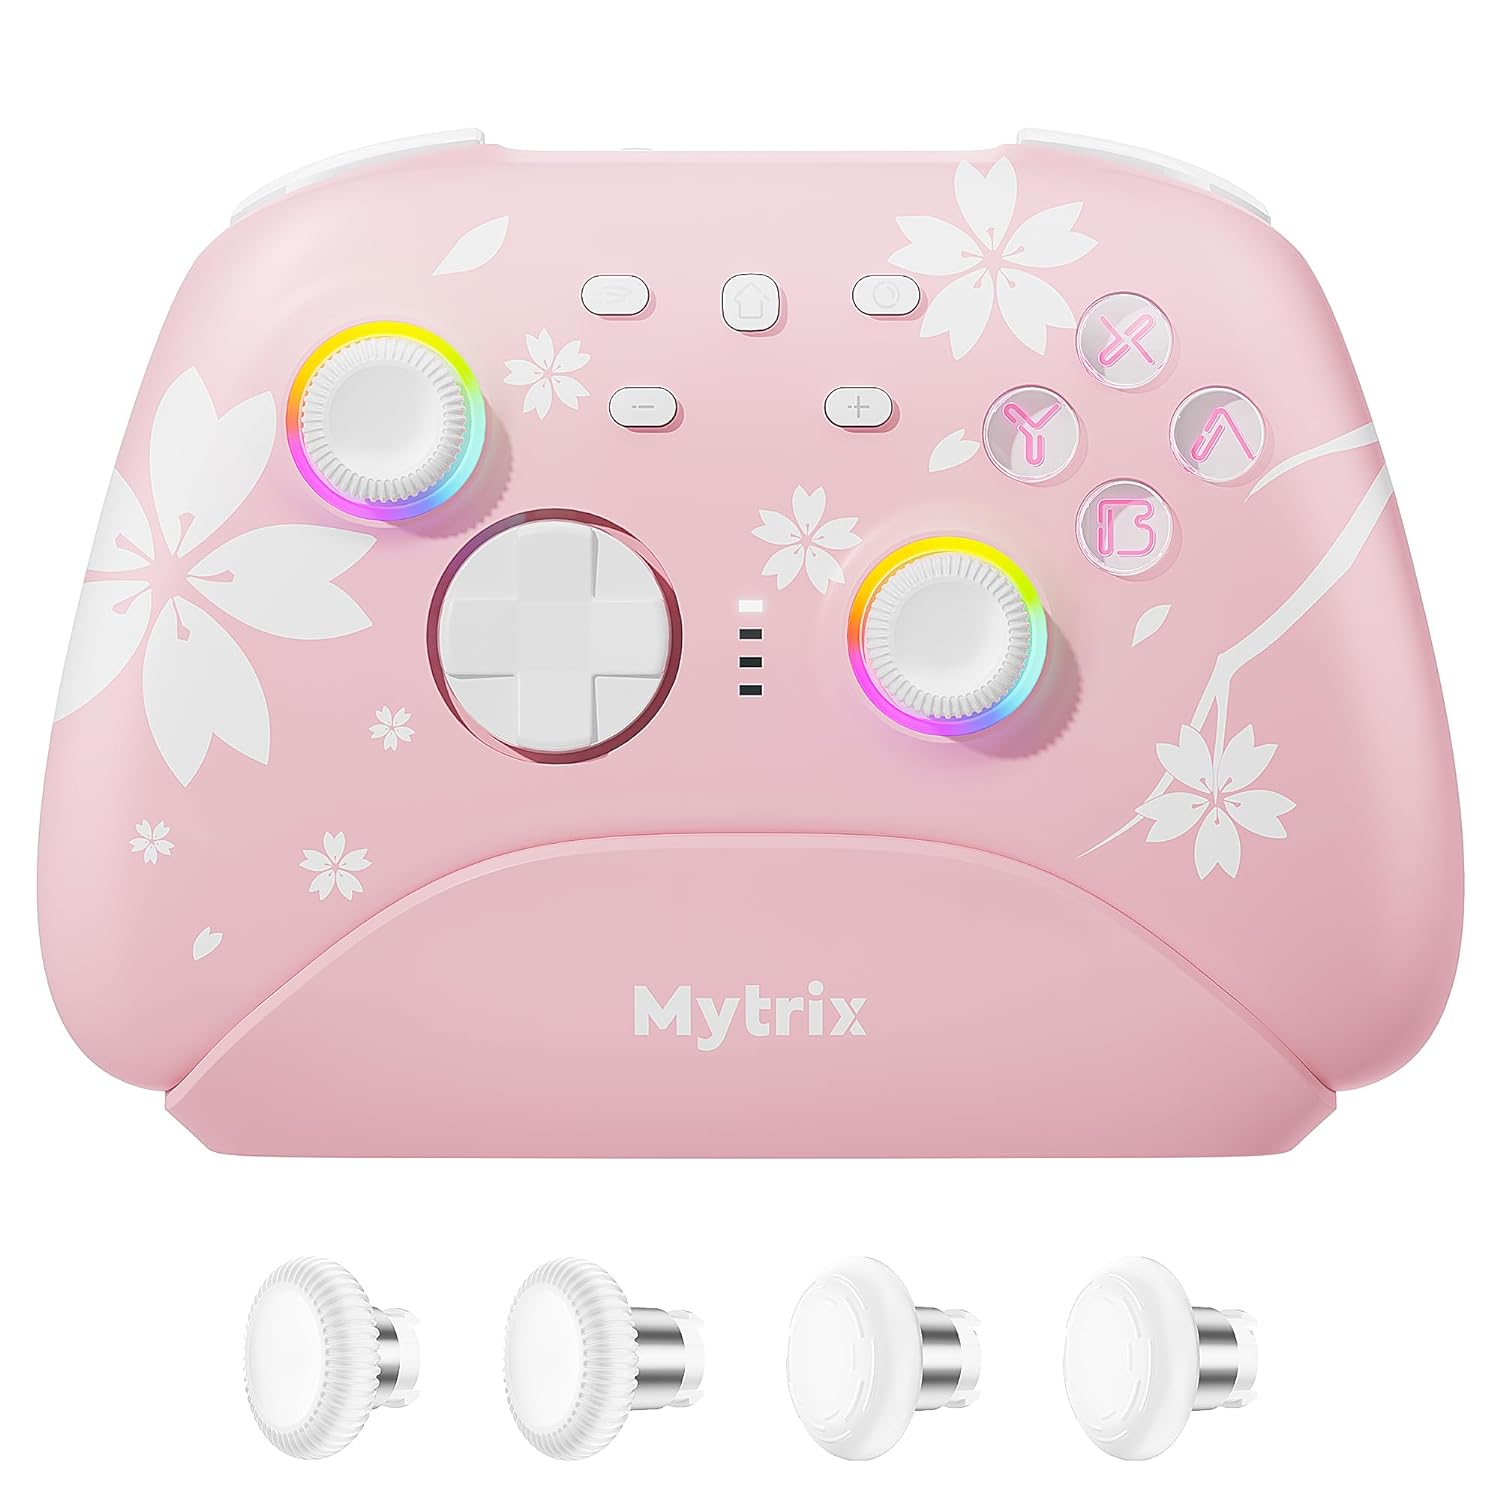 Mytrix Wireless Pro Controllers with Charging Dock, Pink Bluetooth Controller with Hall Effect Joysticks/Hall Trigger (No Drift) for Nintendo Switch, Windows PC iOS Android Steam